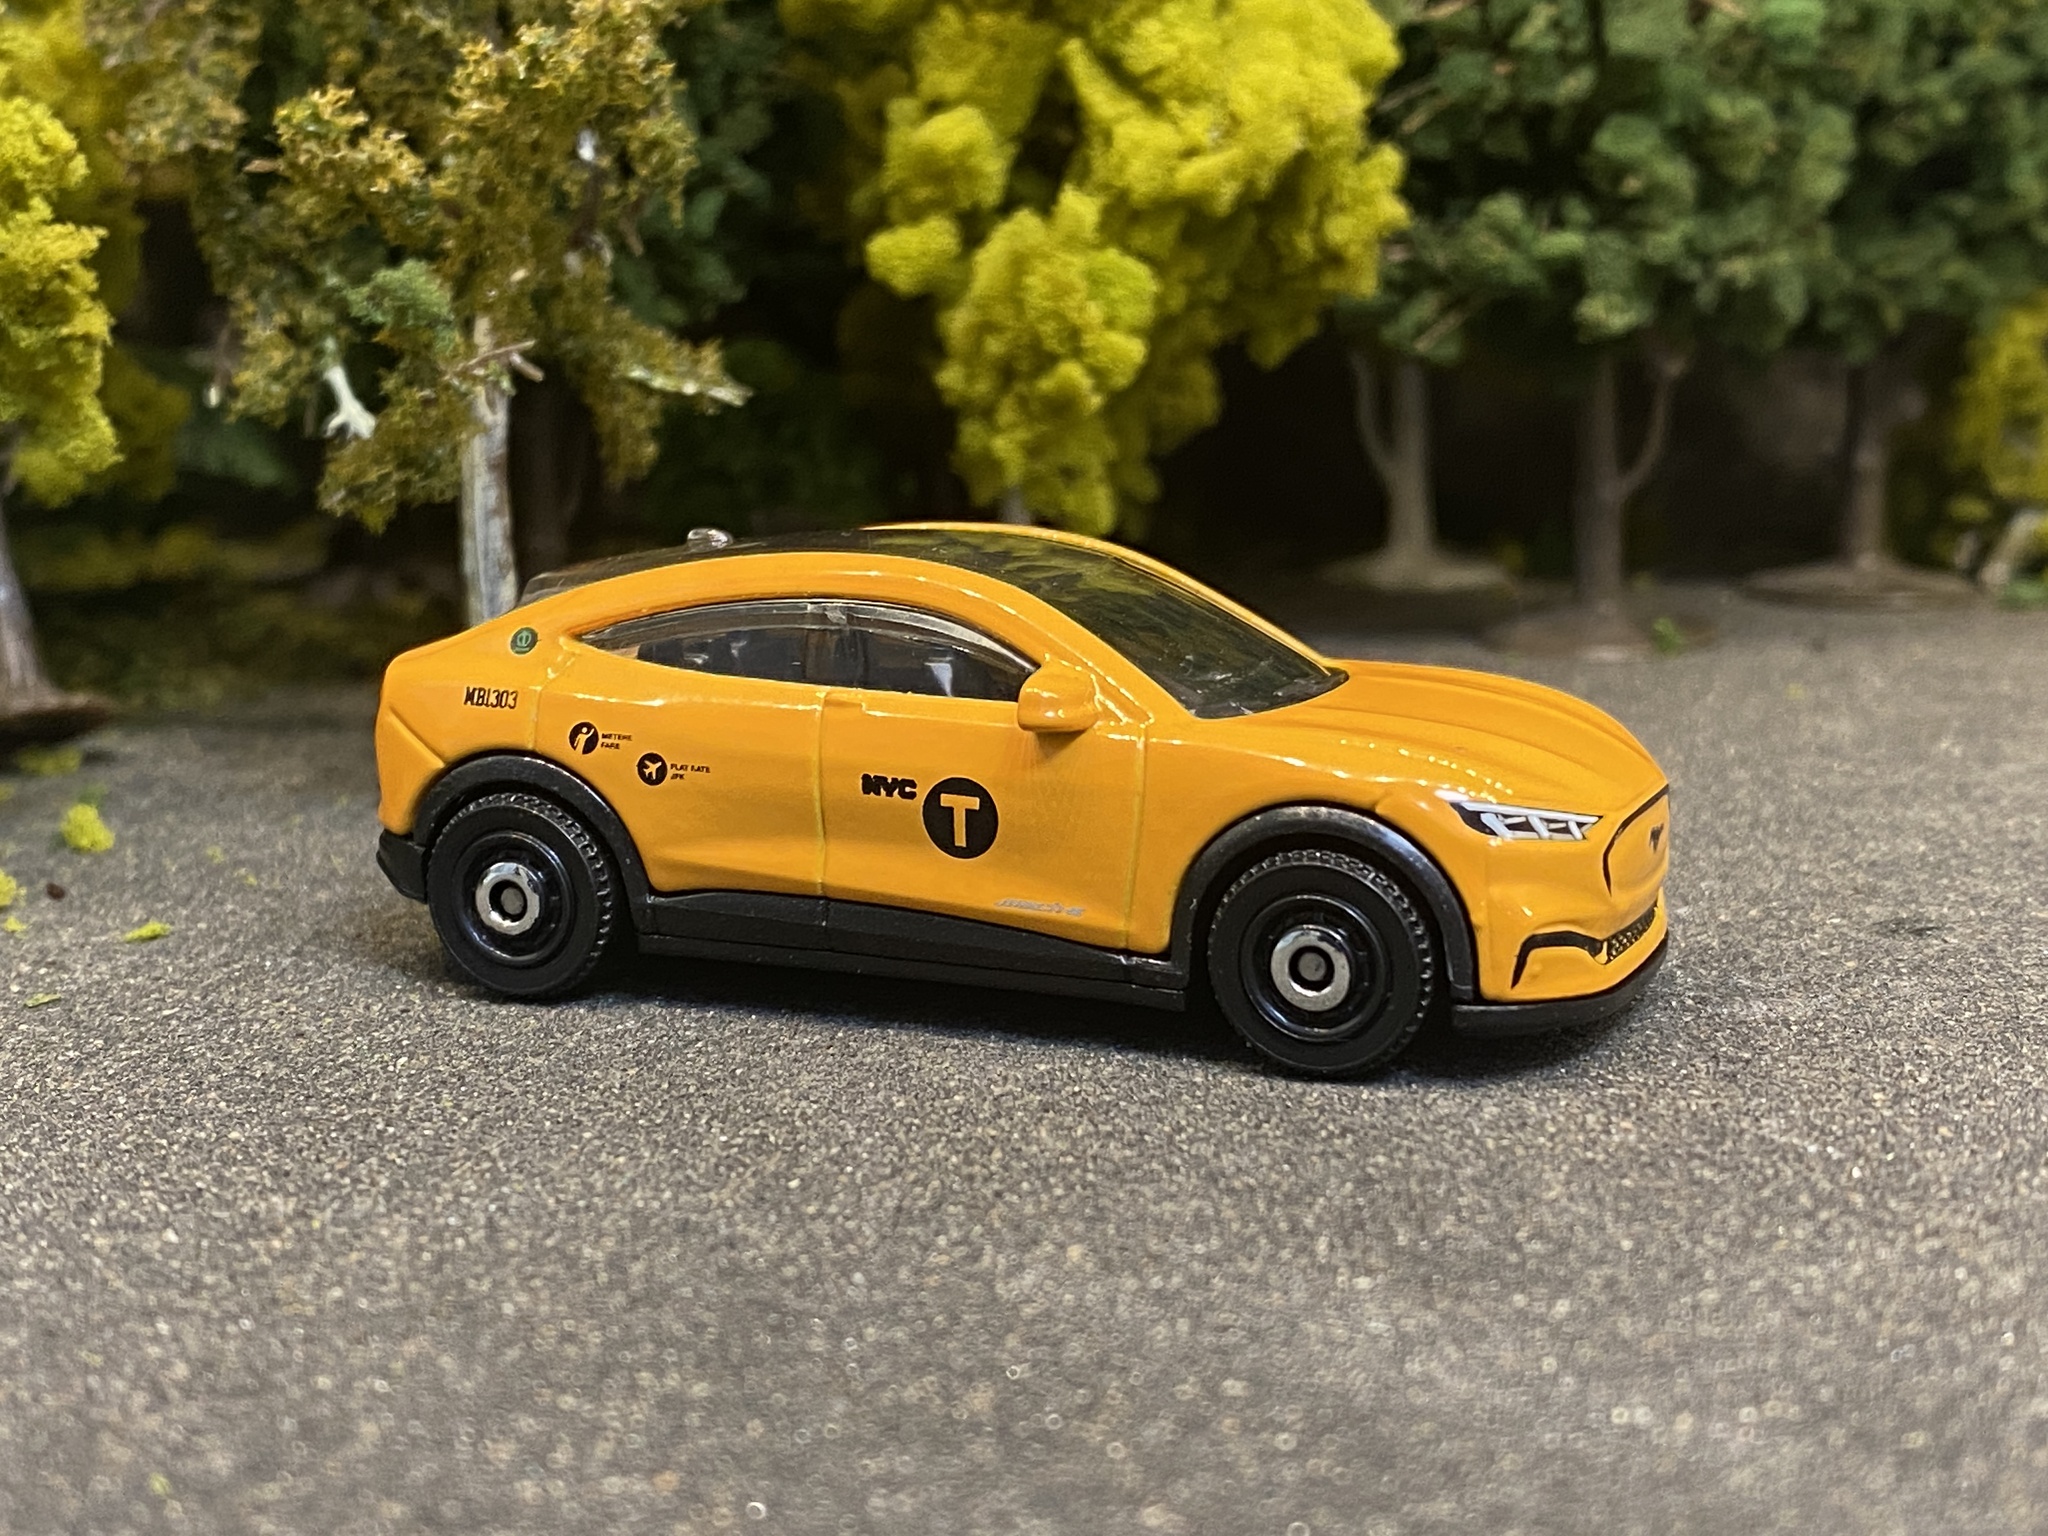 Skala 1/64 Matchbox 70 years - 2021 Ford Mustang Mach-E, NY Cab/Taxi